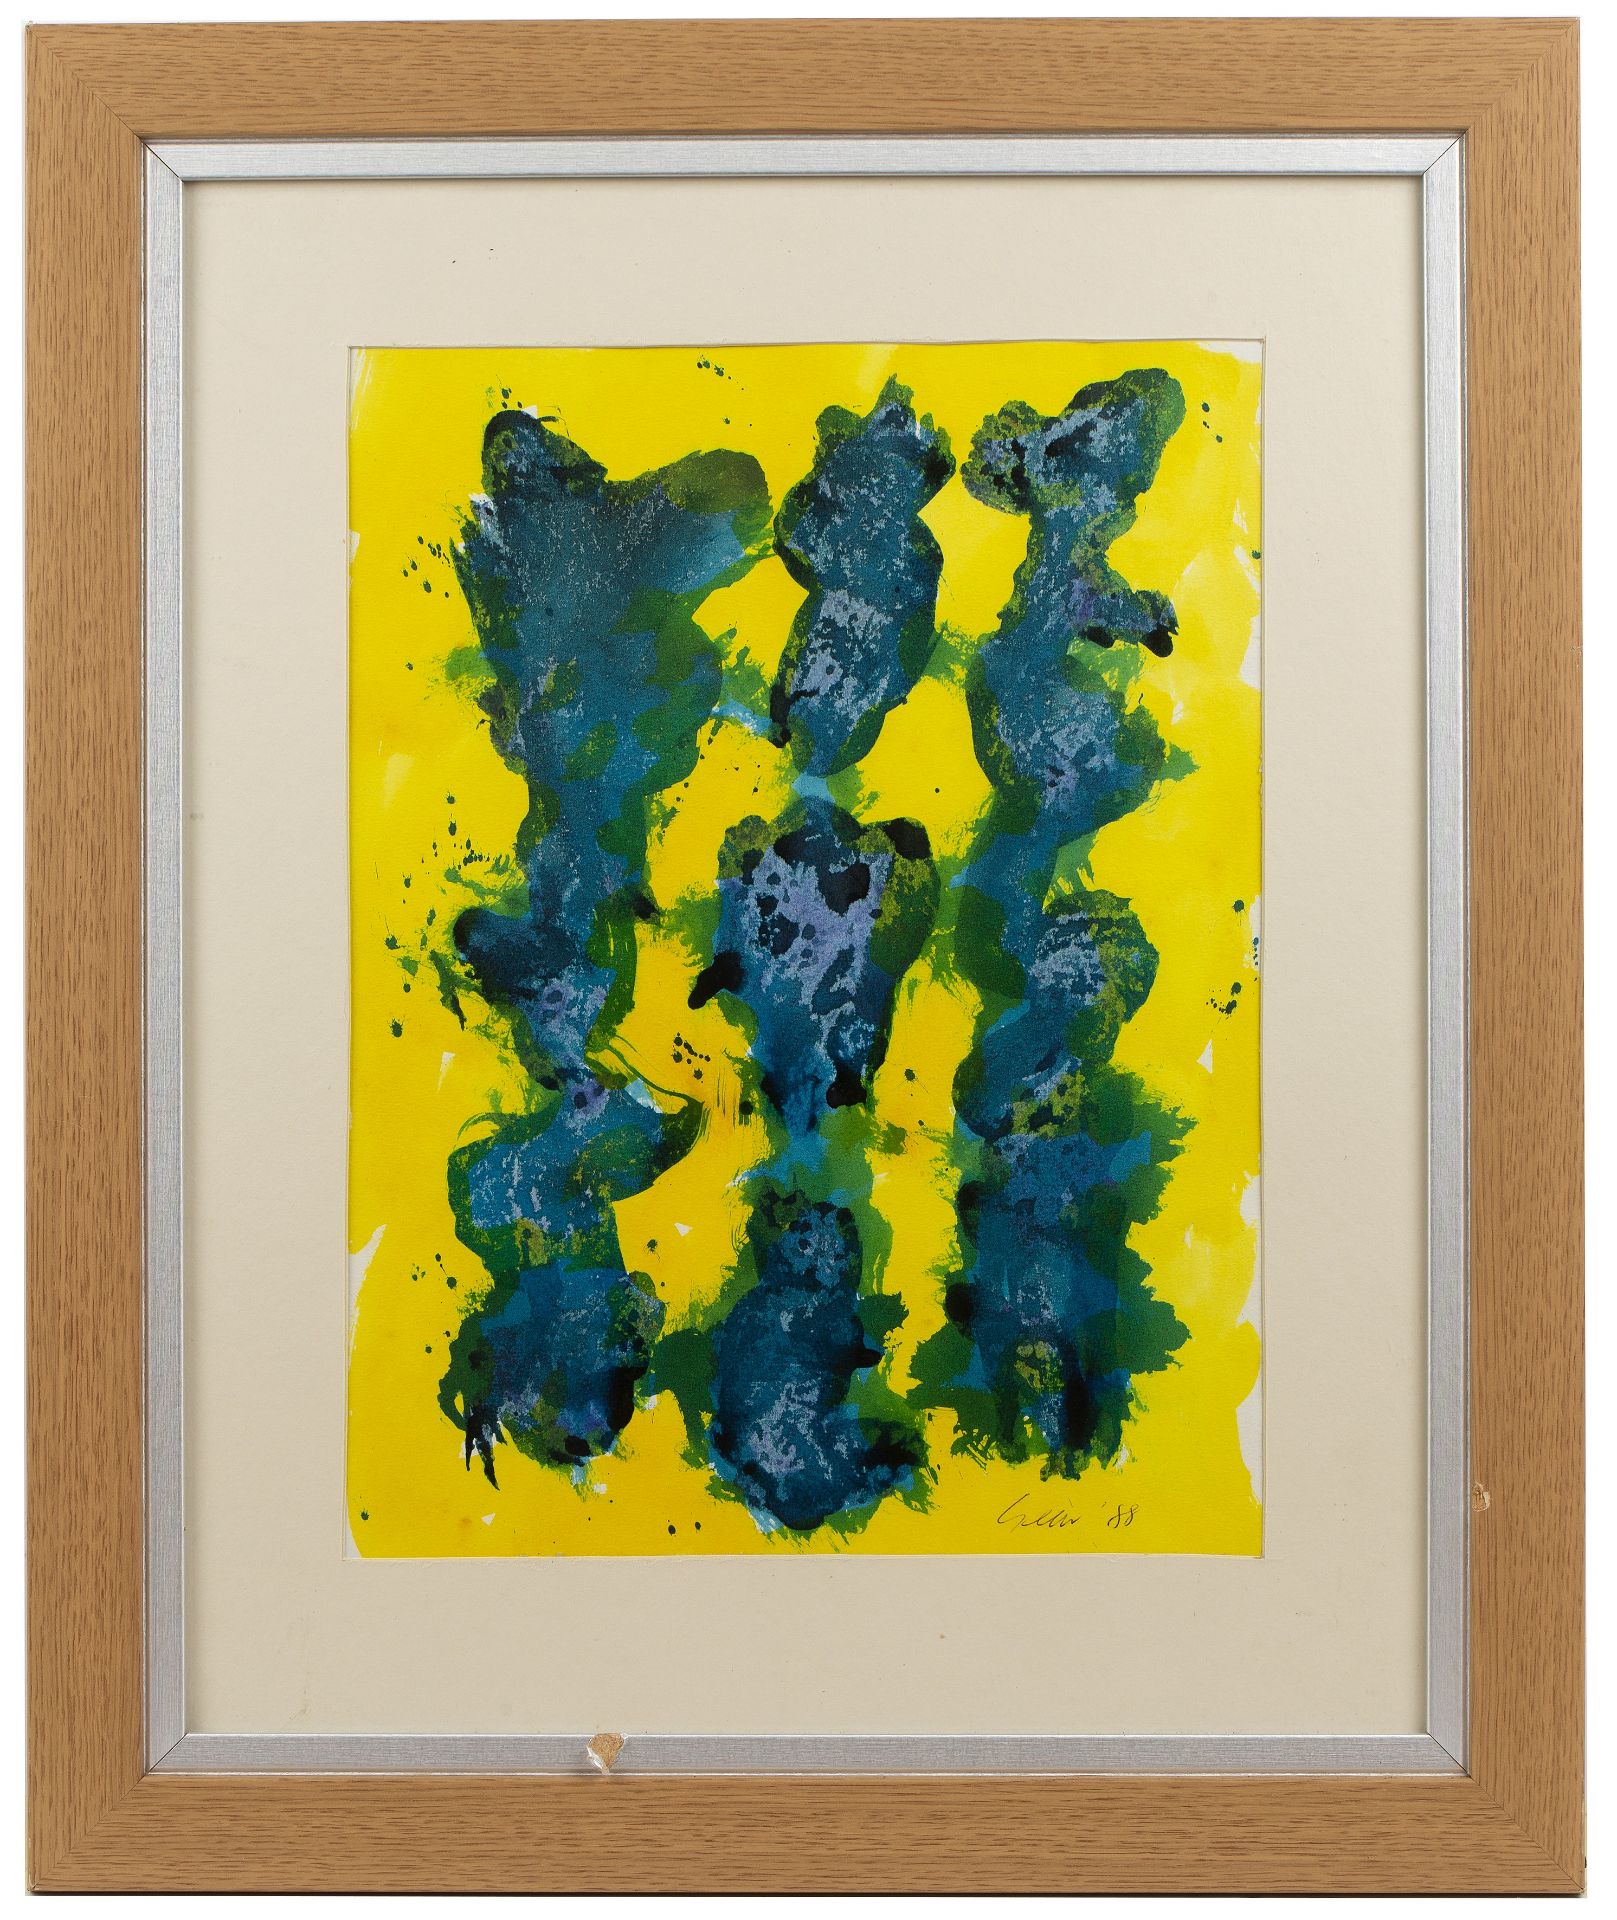 William Gear (1955-1997) 'Untitled yellow, green and blue', mixed media, signed and dated 1988 lower - Image 2 of 3